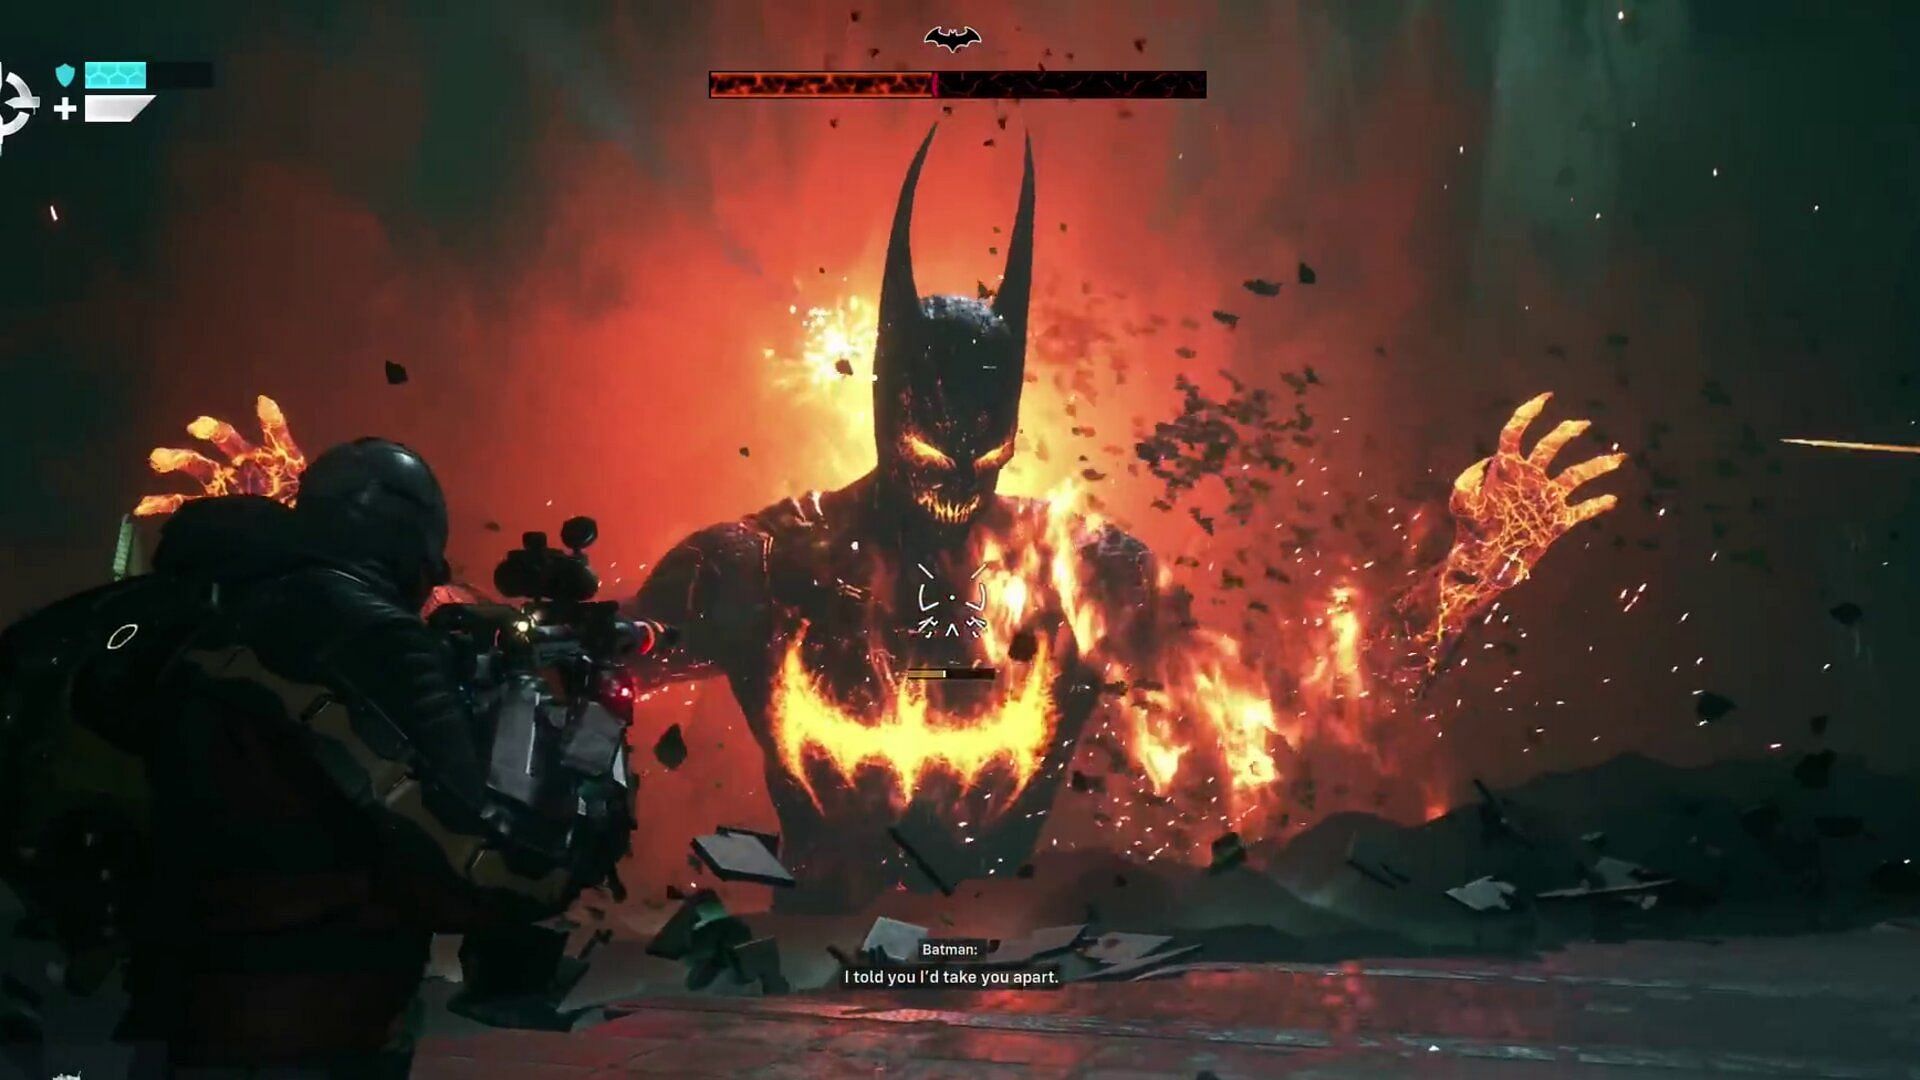 After being overcome by fear, you can go ahead and defeat Batman in Suicide Squad Kill the Justice League (Image via YouTube/GameClips)